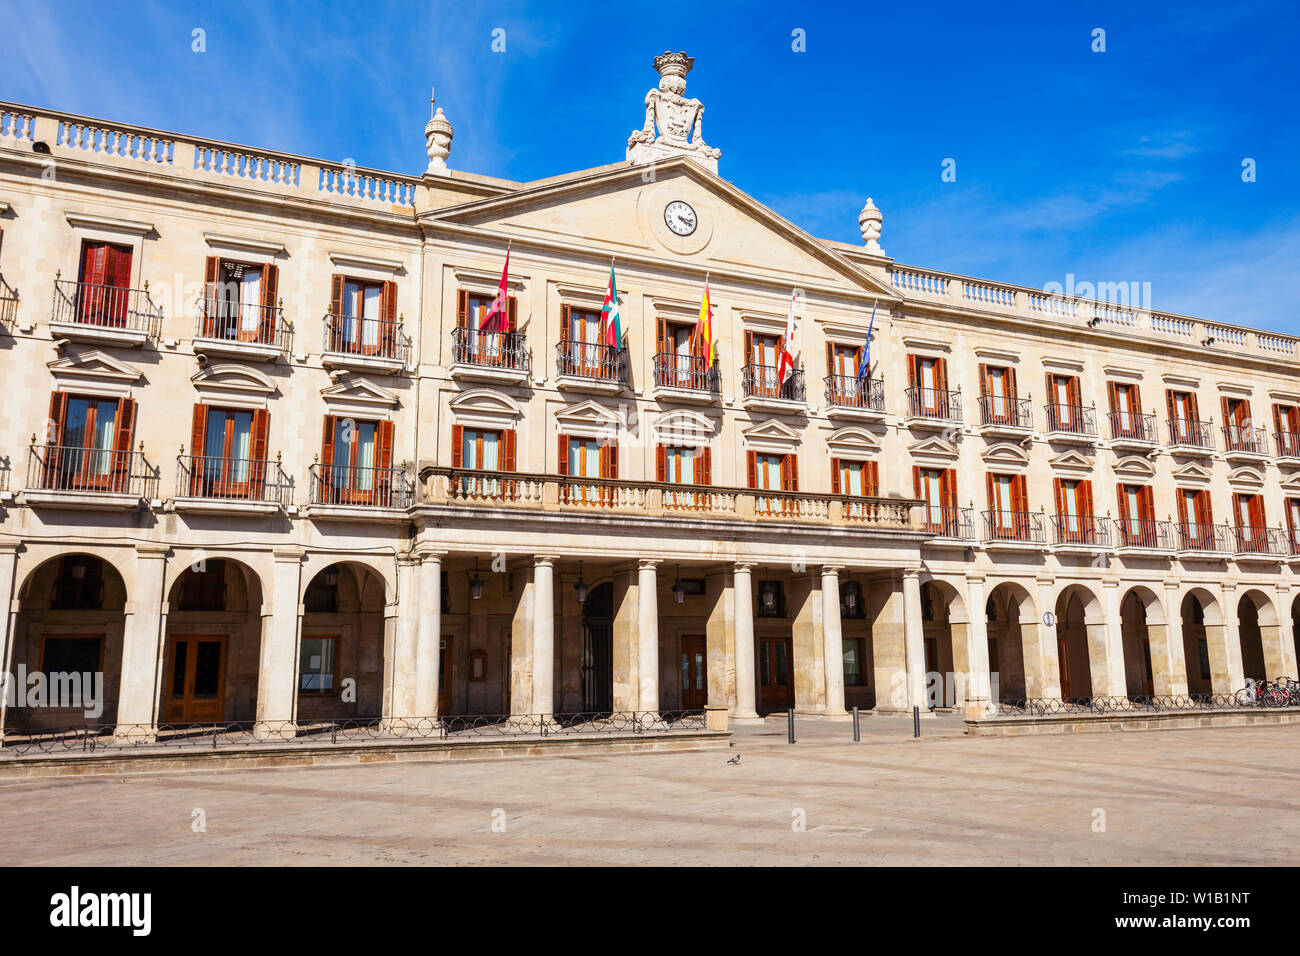 New Spain Square or Plaza Espana Nueva in Vitoria-Gasteiz city, Basque Country in northern Spain Stock Photo